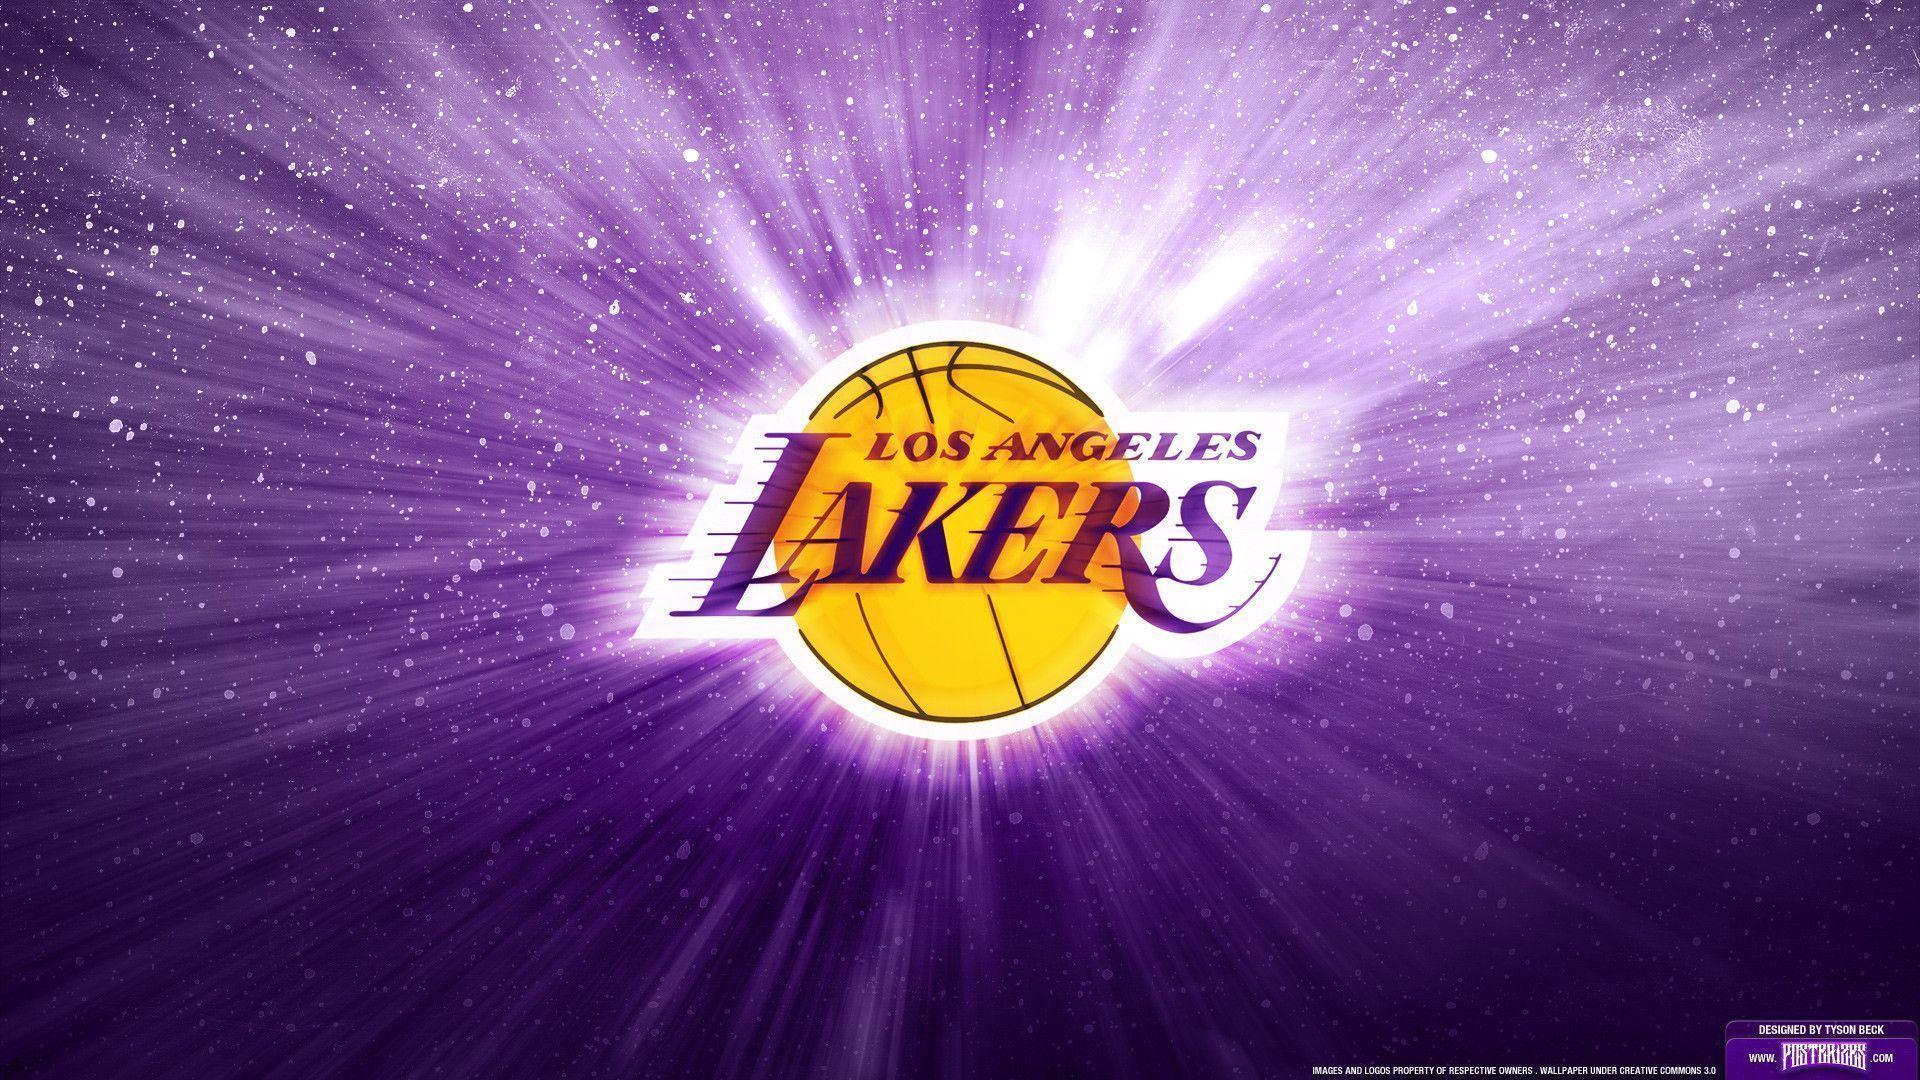 Angeles Lakers Wallpapers - Wallpaper Cave